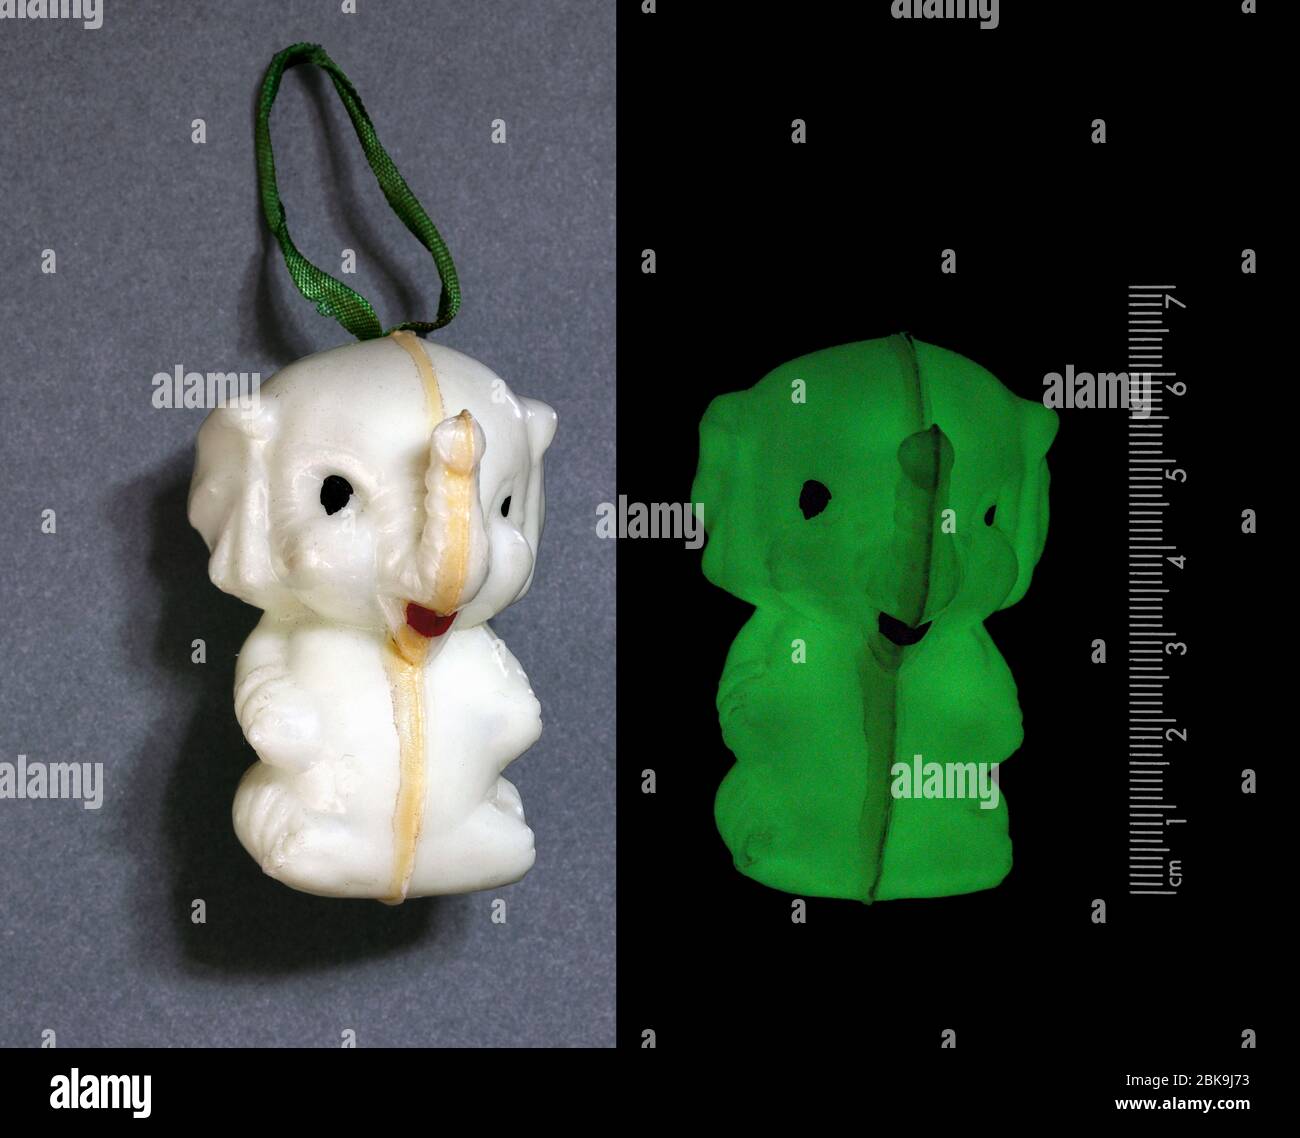 A plastic trinket resembling an elephant (!) coated with phosphorescent paint which makes it glow in the dark. Photos of it in daylight and darkness. Stock Photo